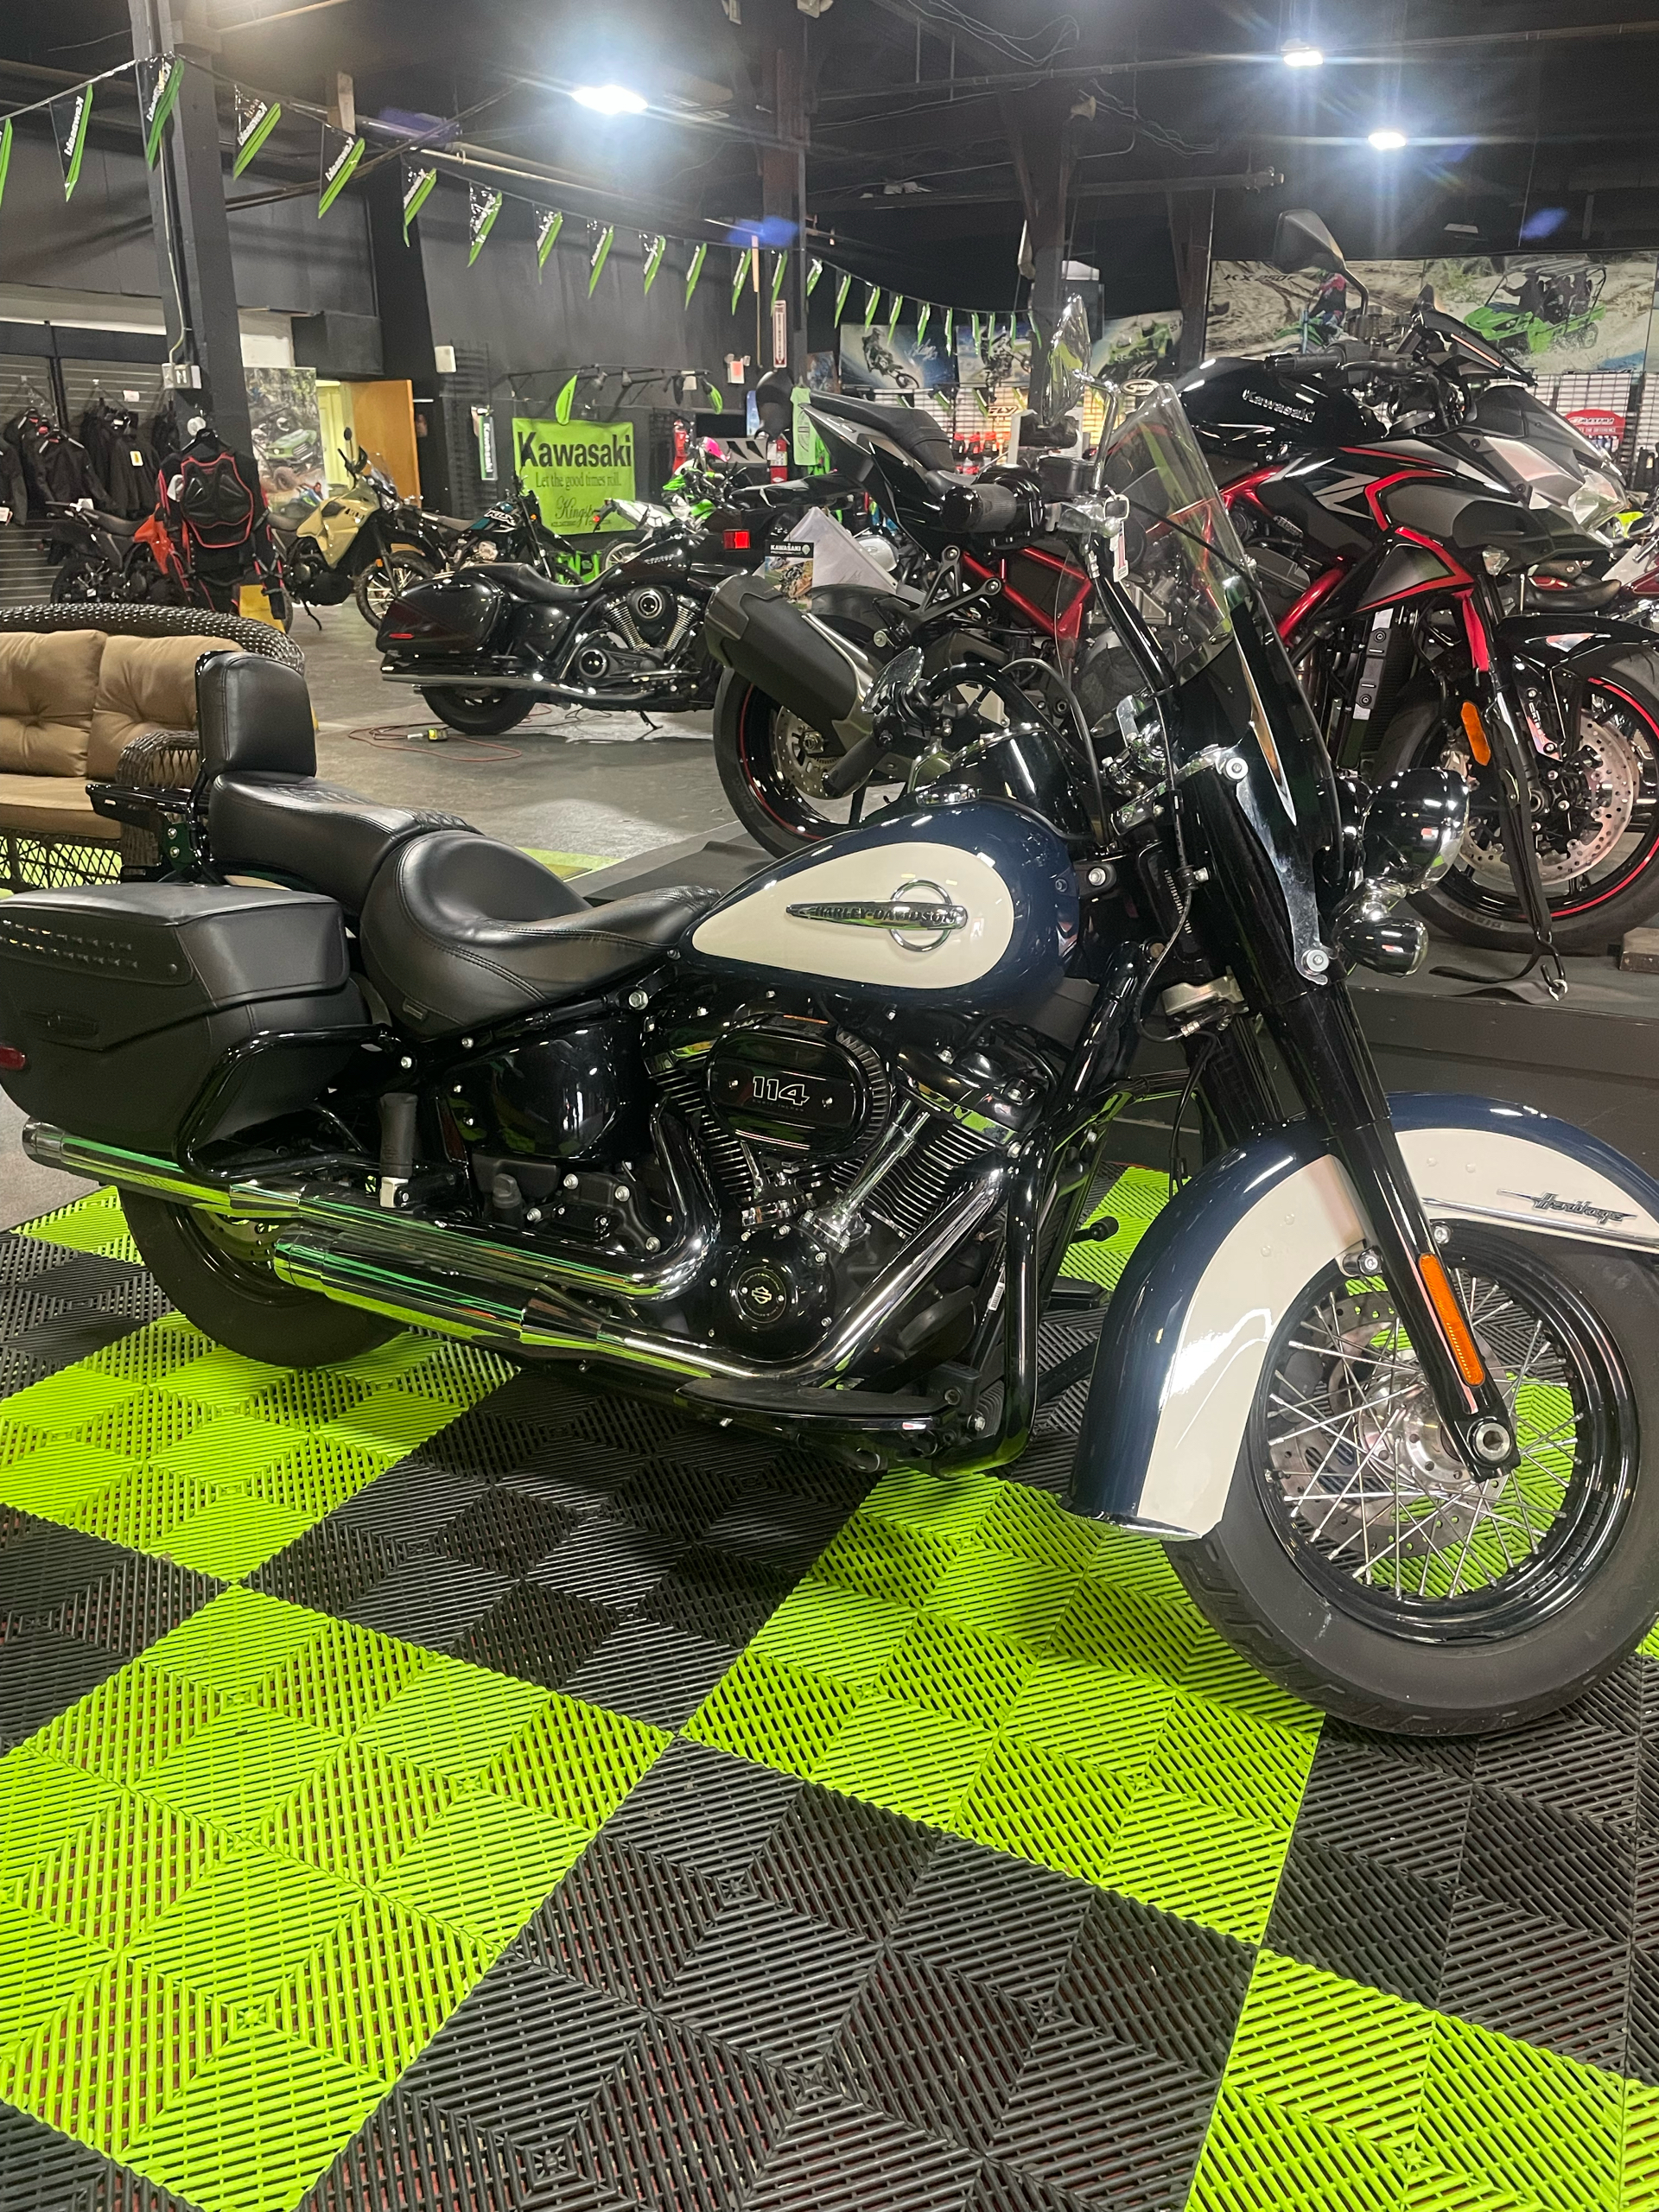 2019 Harley-Davidson Heritage Classic 114 in Kingsport, Tennessee - Photo 1